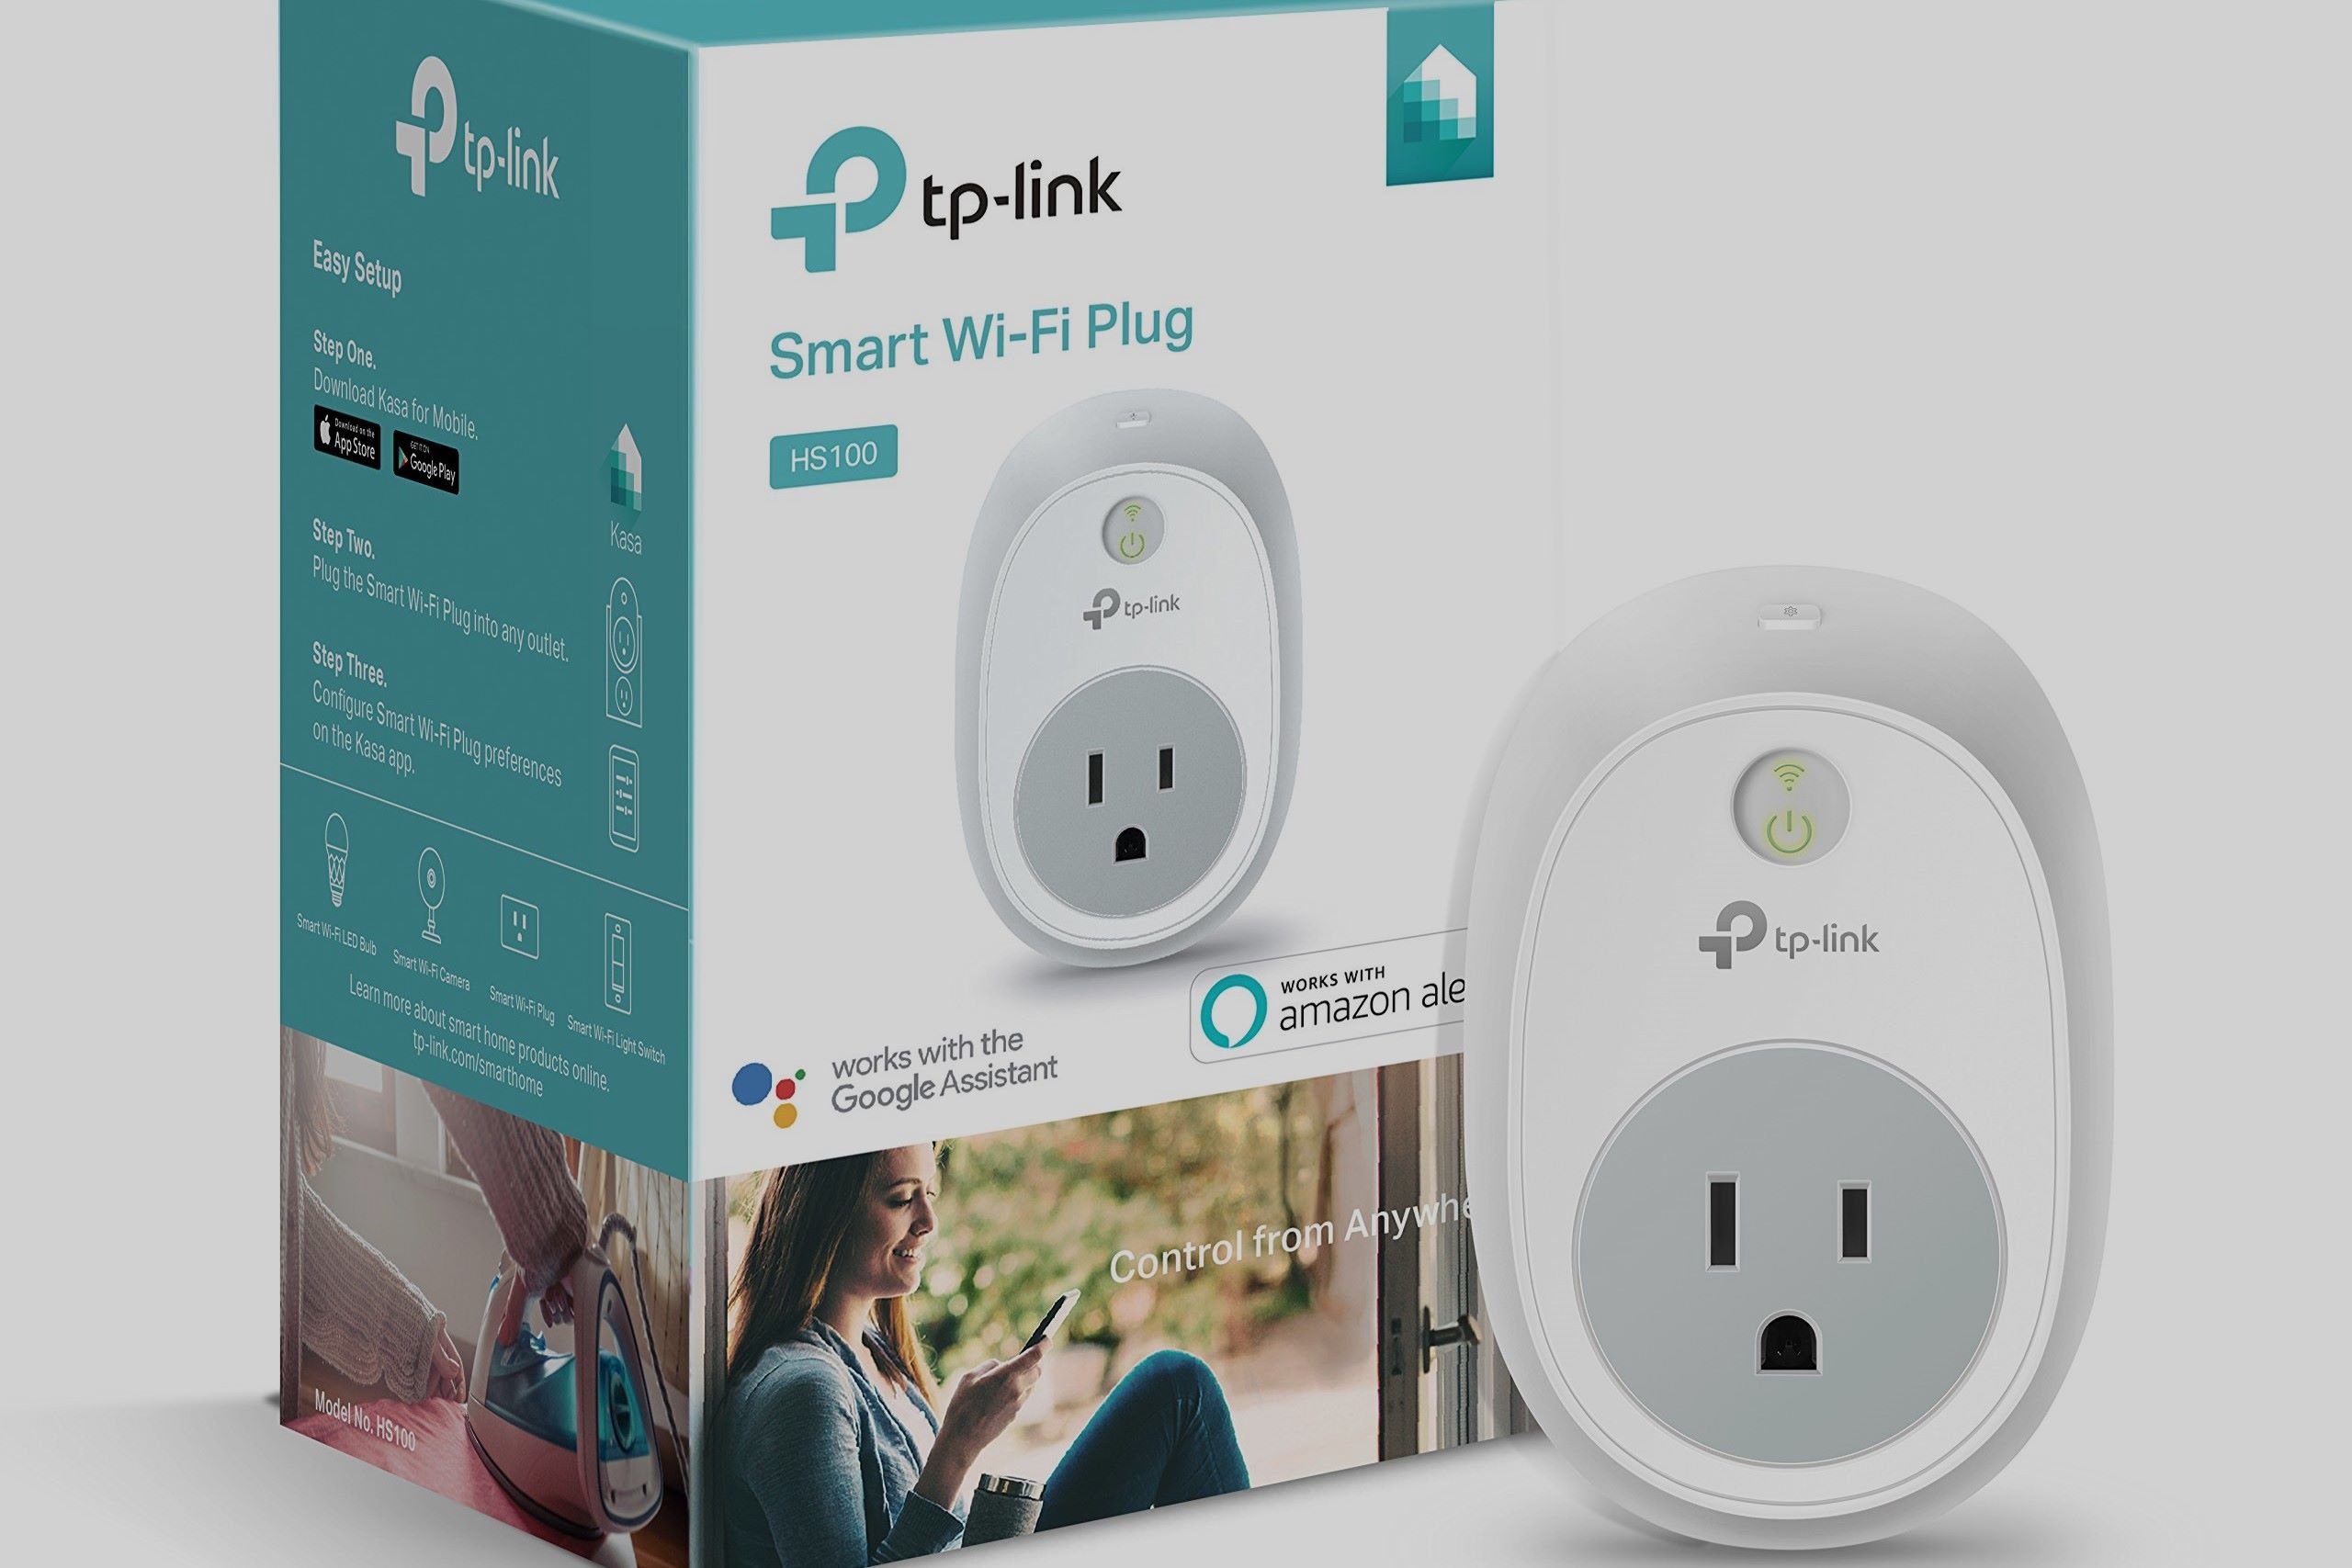 How To Have Amazon Echo Control TP-Link Outlet